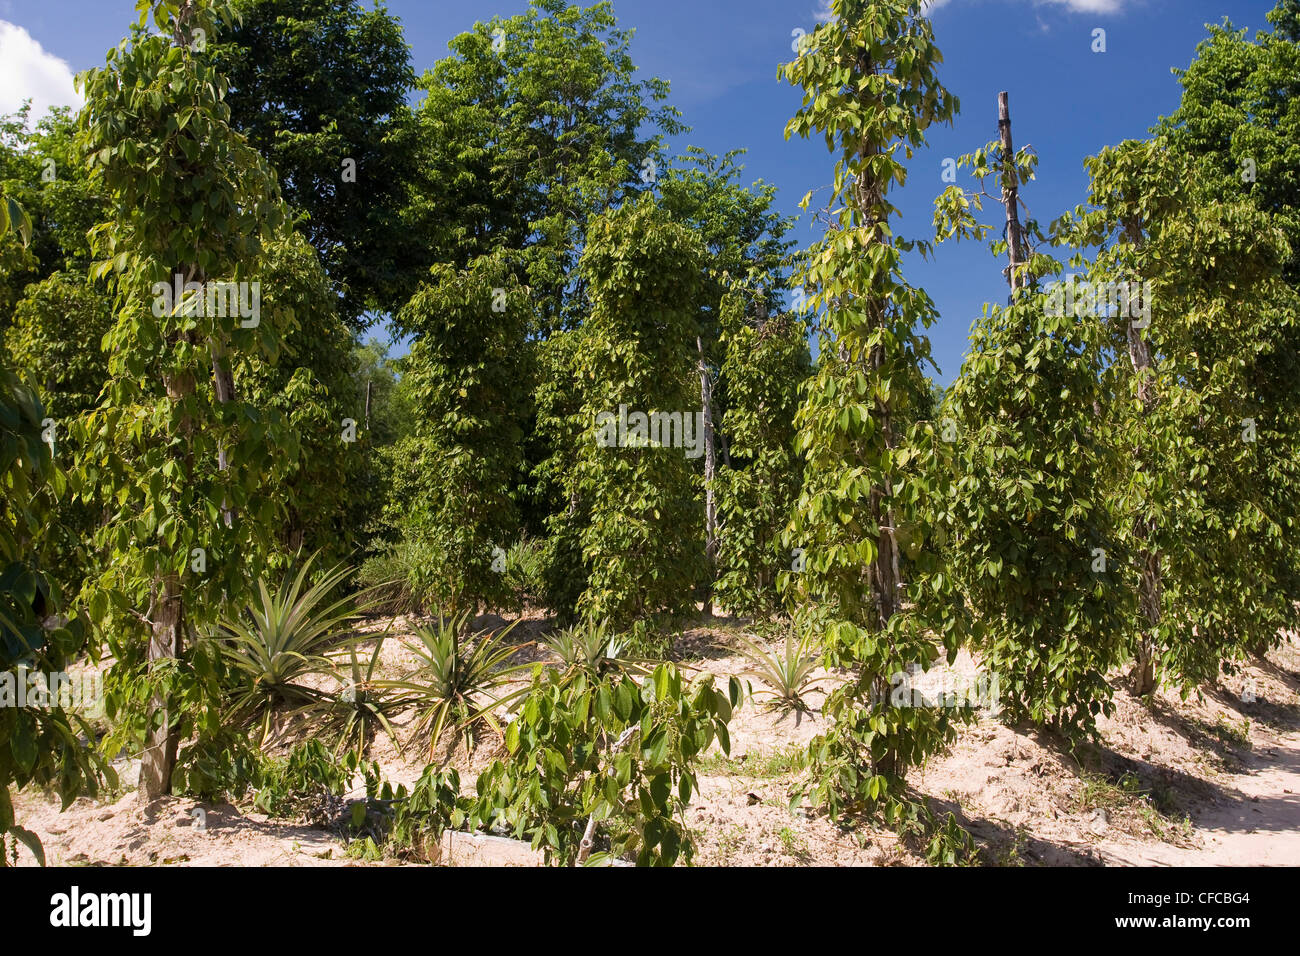 Asia, cultivation, outhouse, pepper, pepper plants, agriculture, agriculturally, Phu Quoc, island, Vietnam Stock Photo